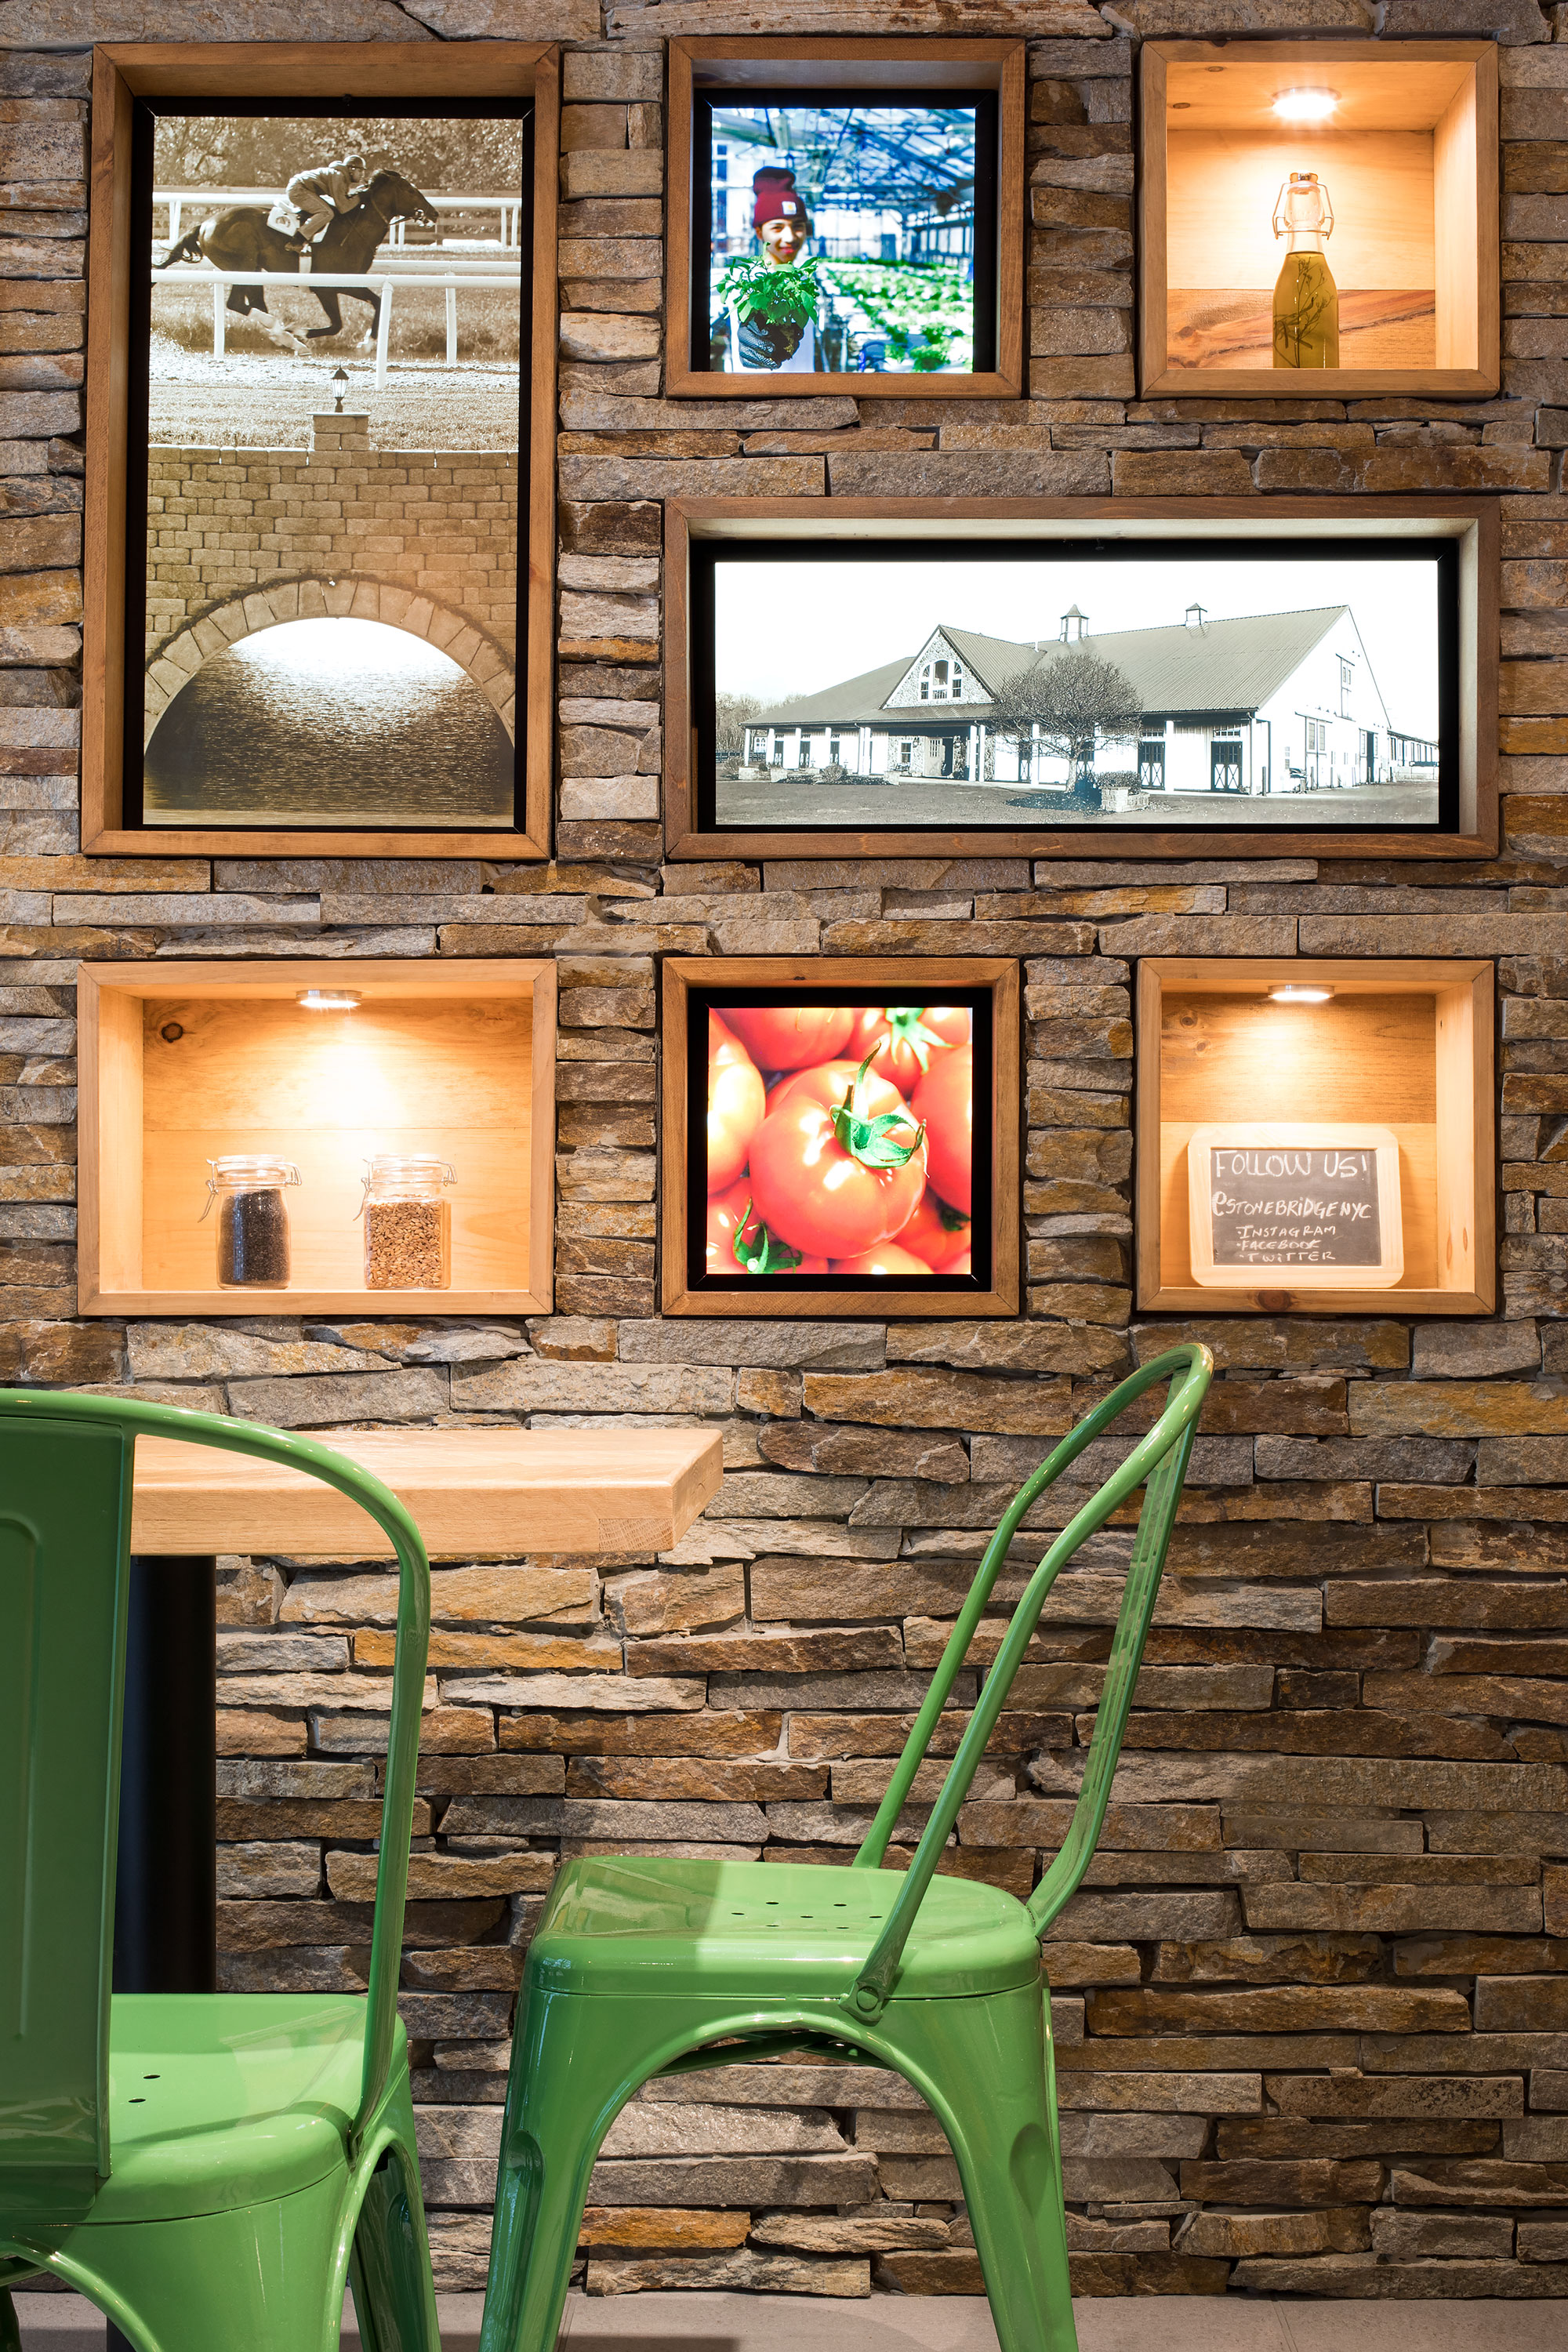 Stone Bridge Pizza & Salad - Entry Seating and Farm to Table Lightbox Wall